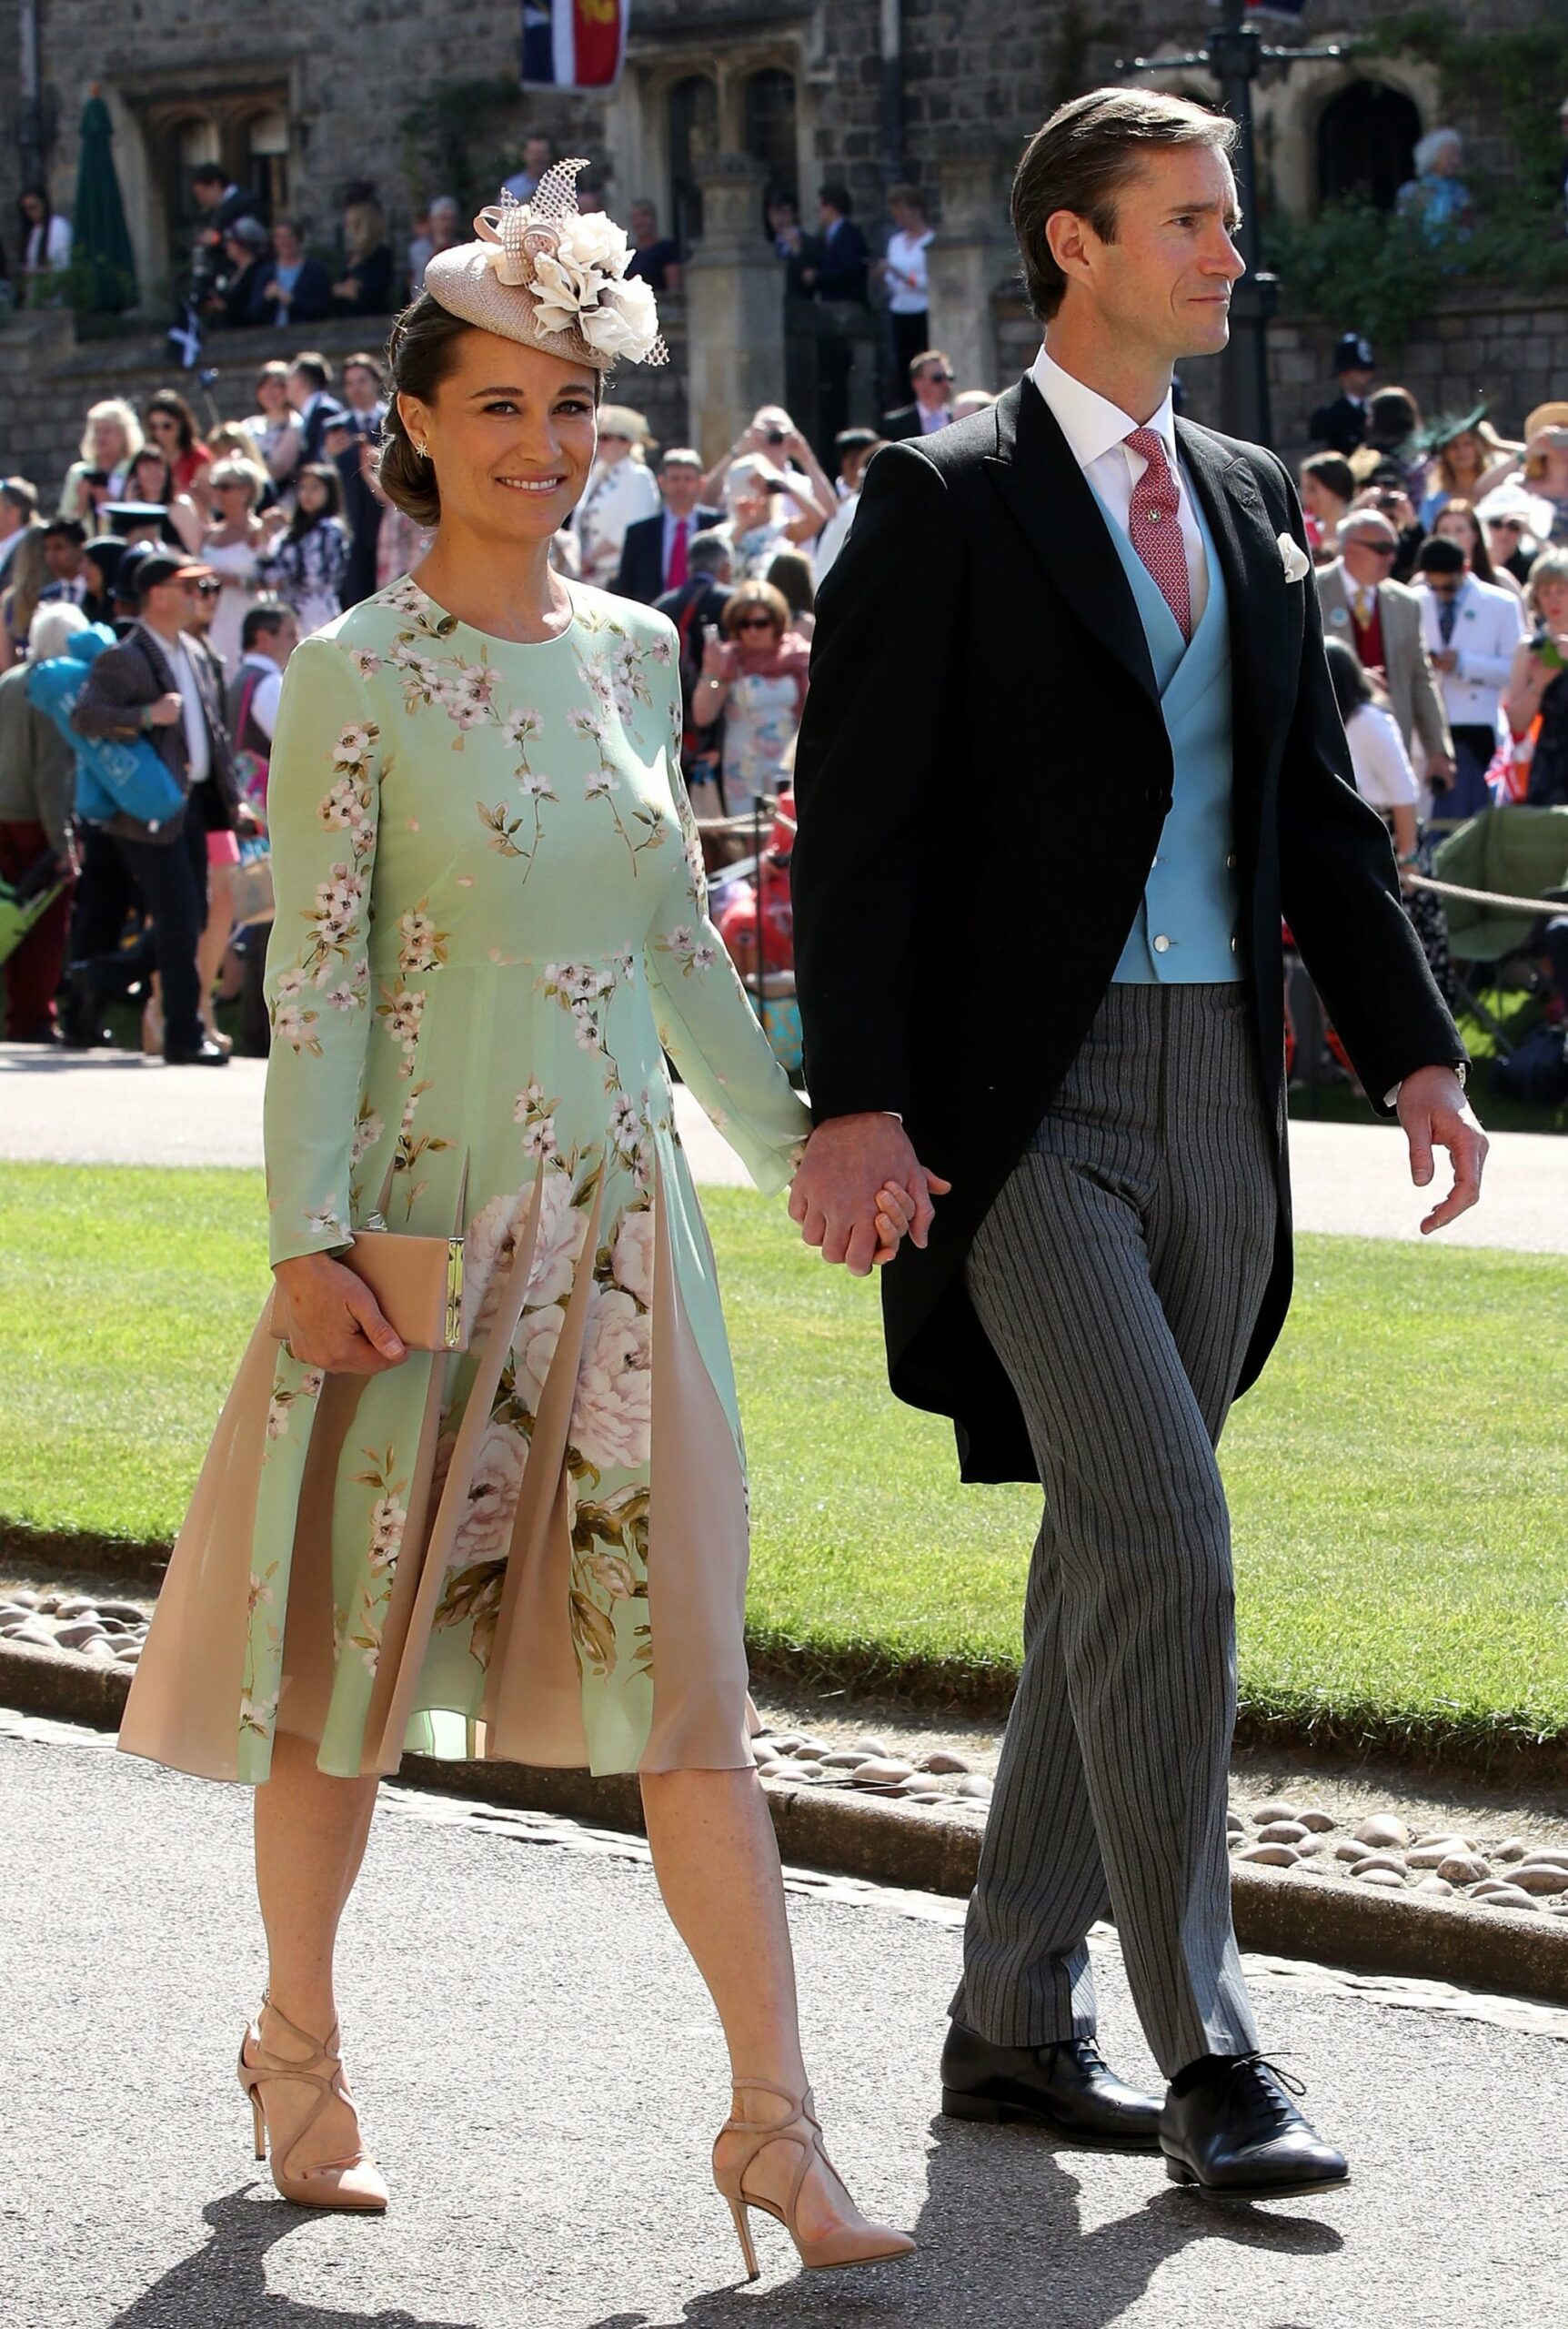 Pippa Middleton and James Matthews arrive for the wedding ceremony of Britain's Prince Harry, Duke of Sussex and US actress Meghan Markle at St George's Chapel, Windsor Castle, in Windsor, on May 19, 2018. (Photo by Chris Radburn / POOL / AFP)        (Photo credit should read CHRIS RADBURN/AFP via Getty Images)